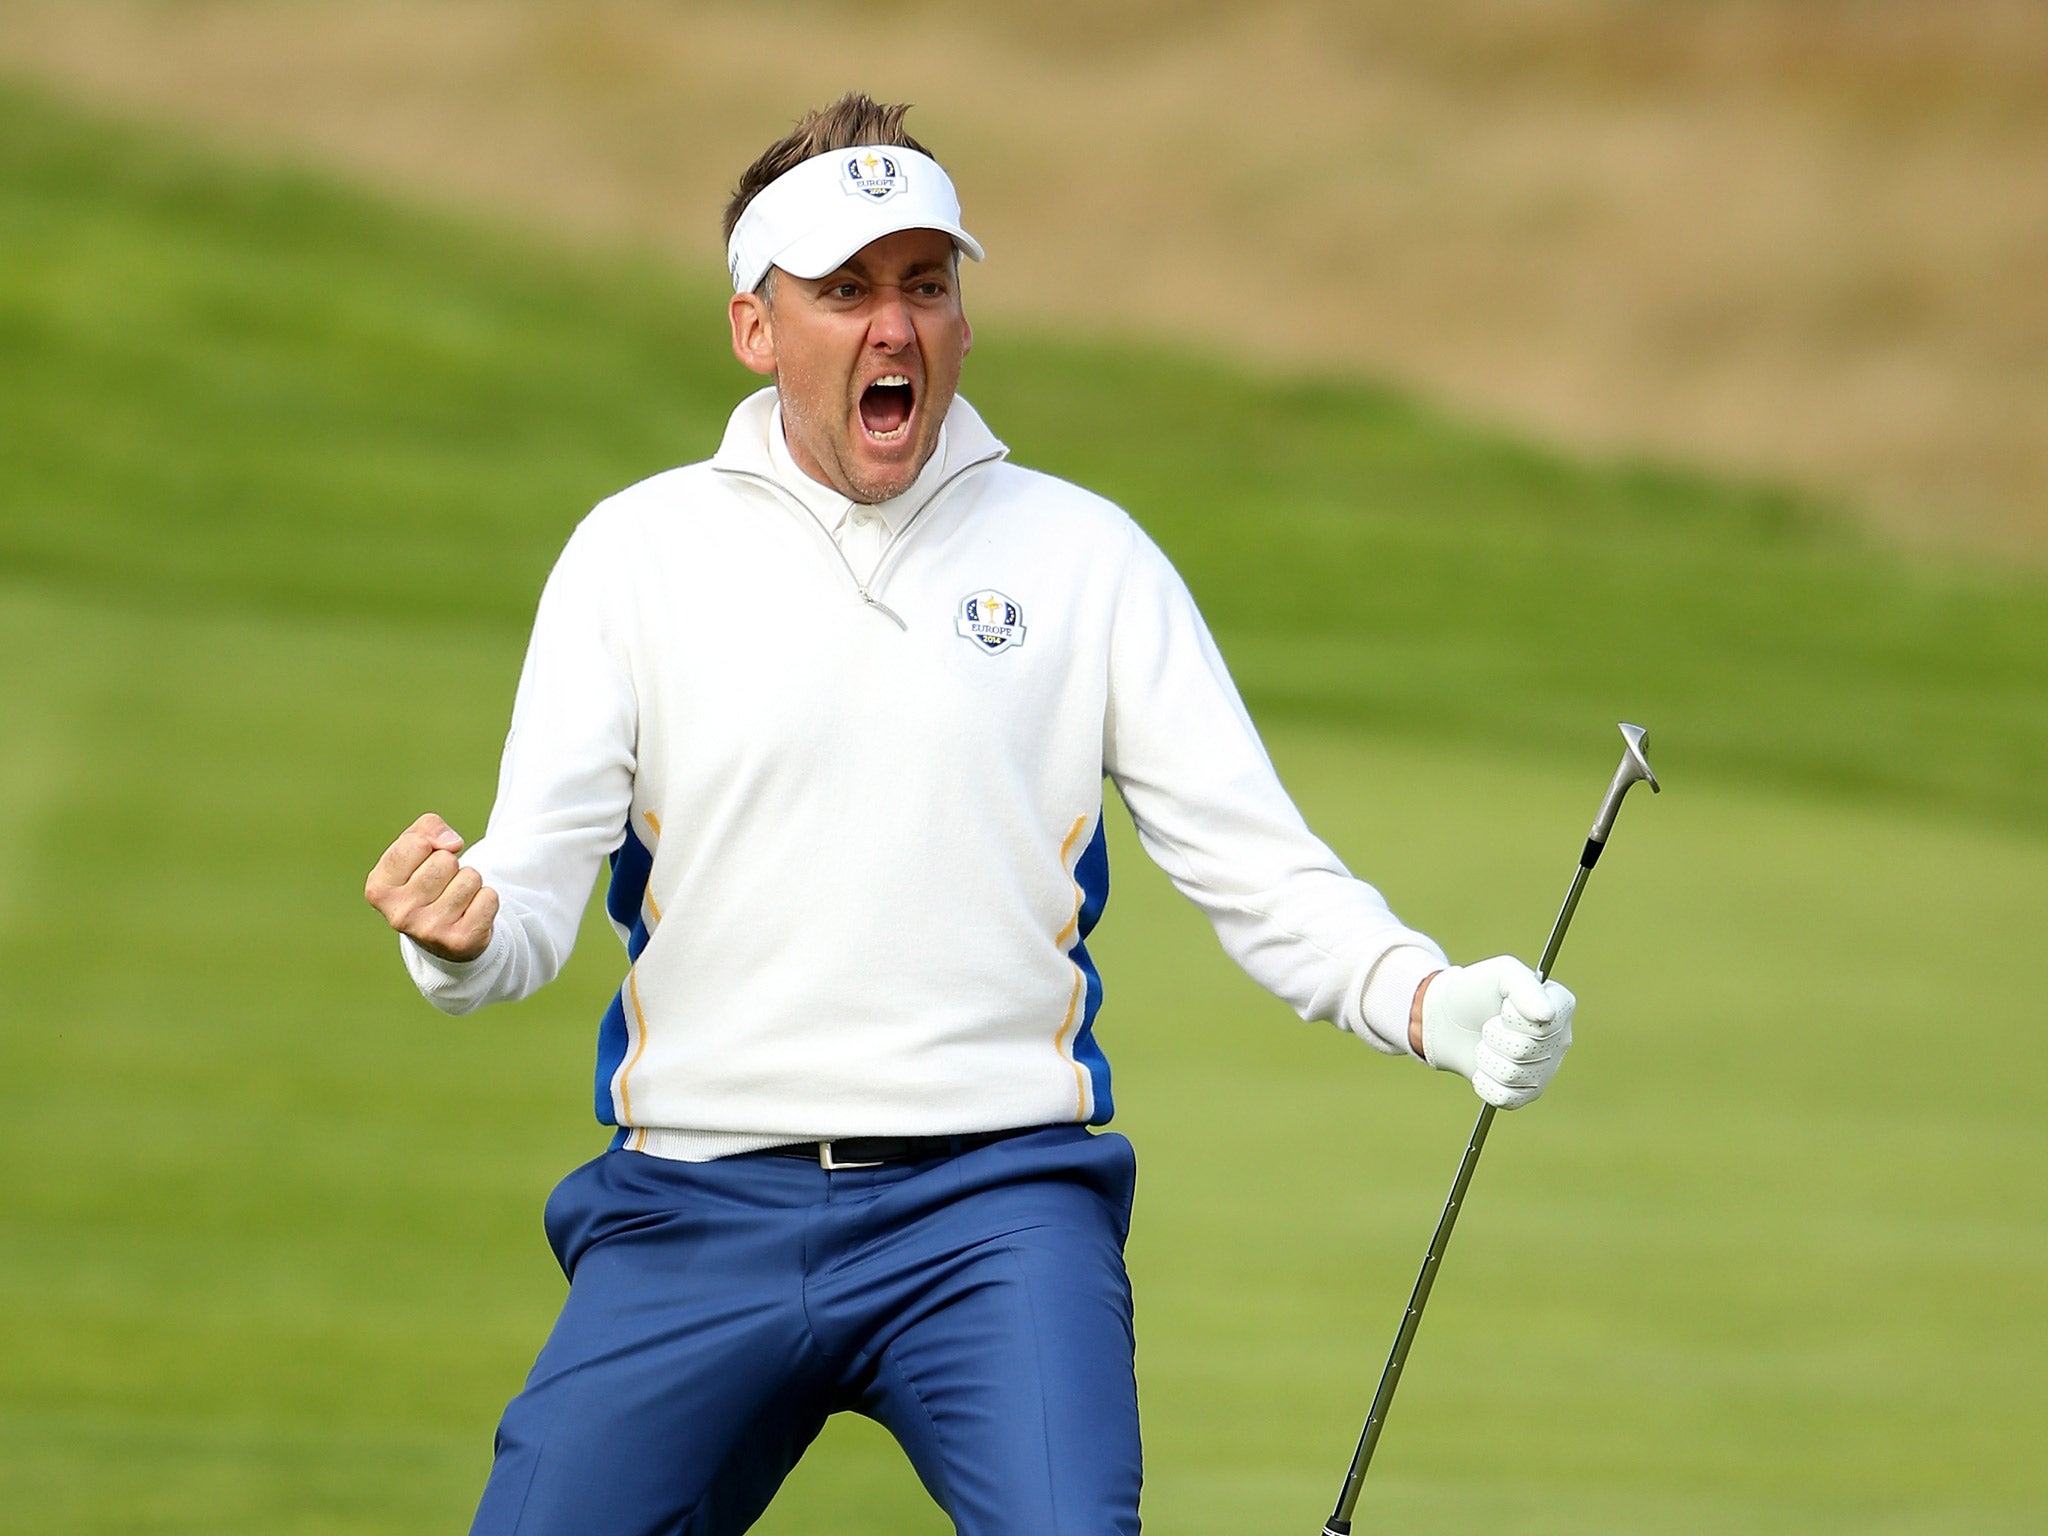 Ian Poulter faces four months out with a foot injury